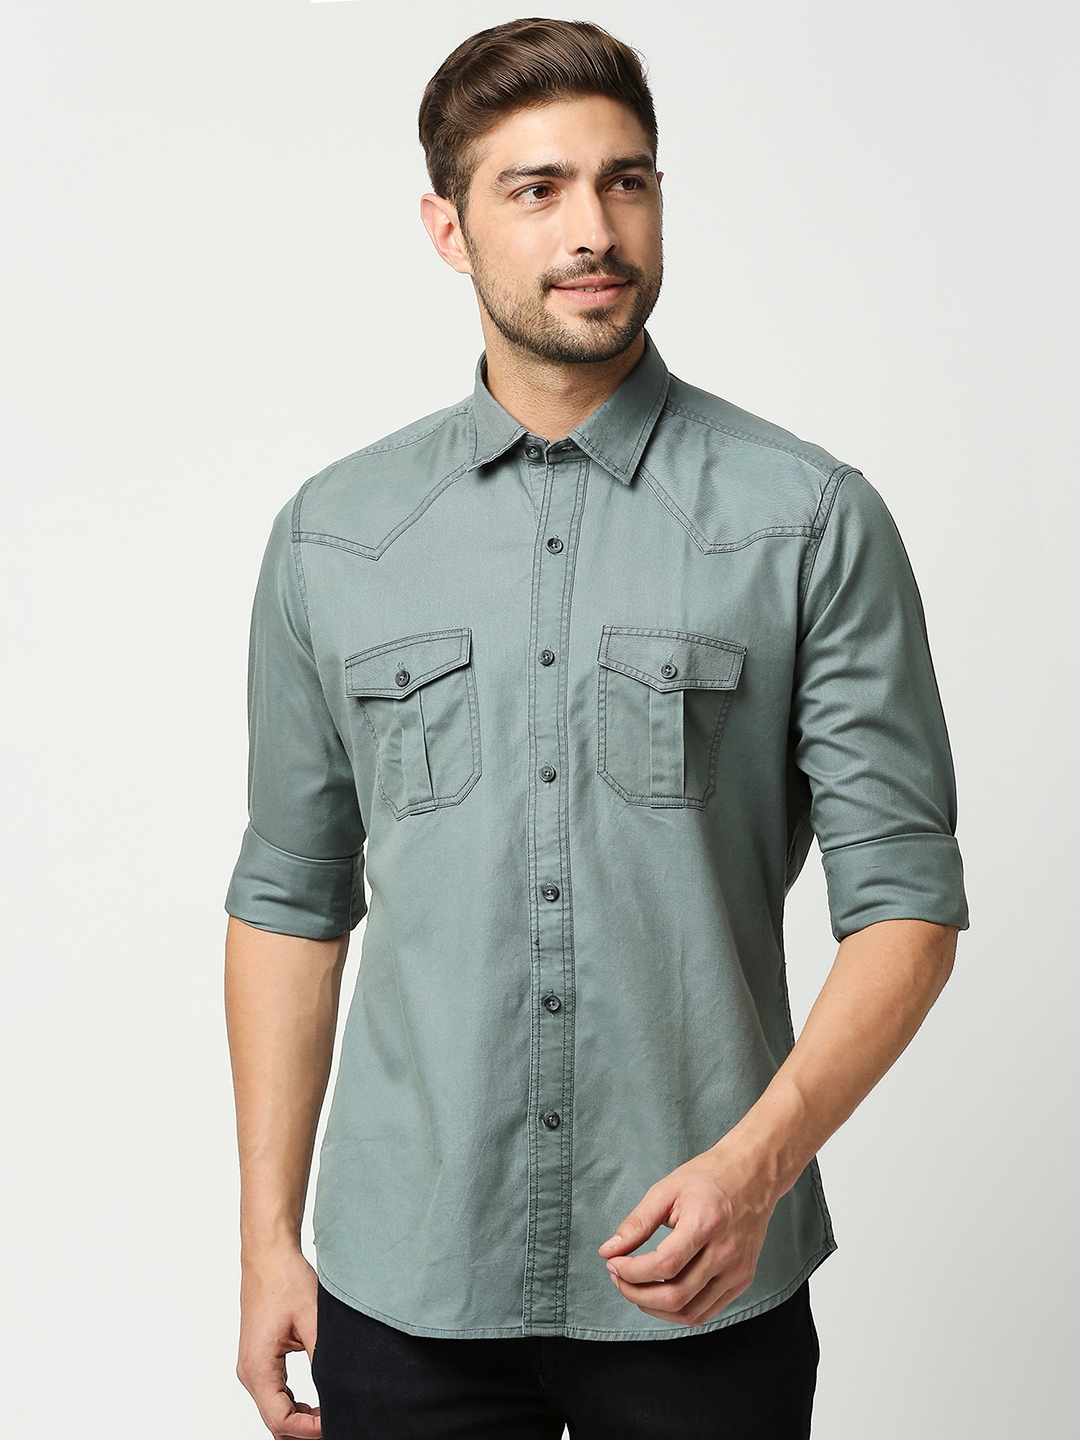 EVOQ | EVOQ's Shiny Green Full Sleeves Cotton Casual Shirt with Double Flap Pocket for Men